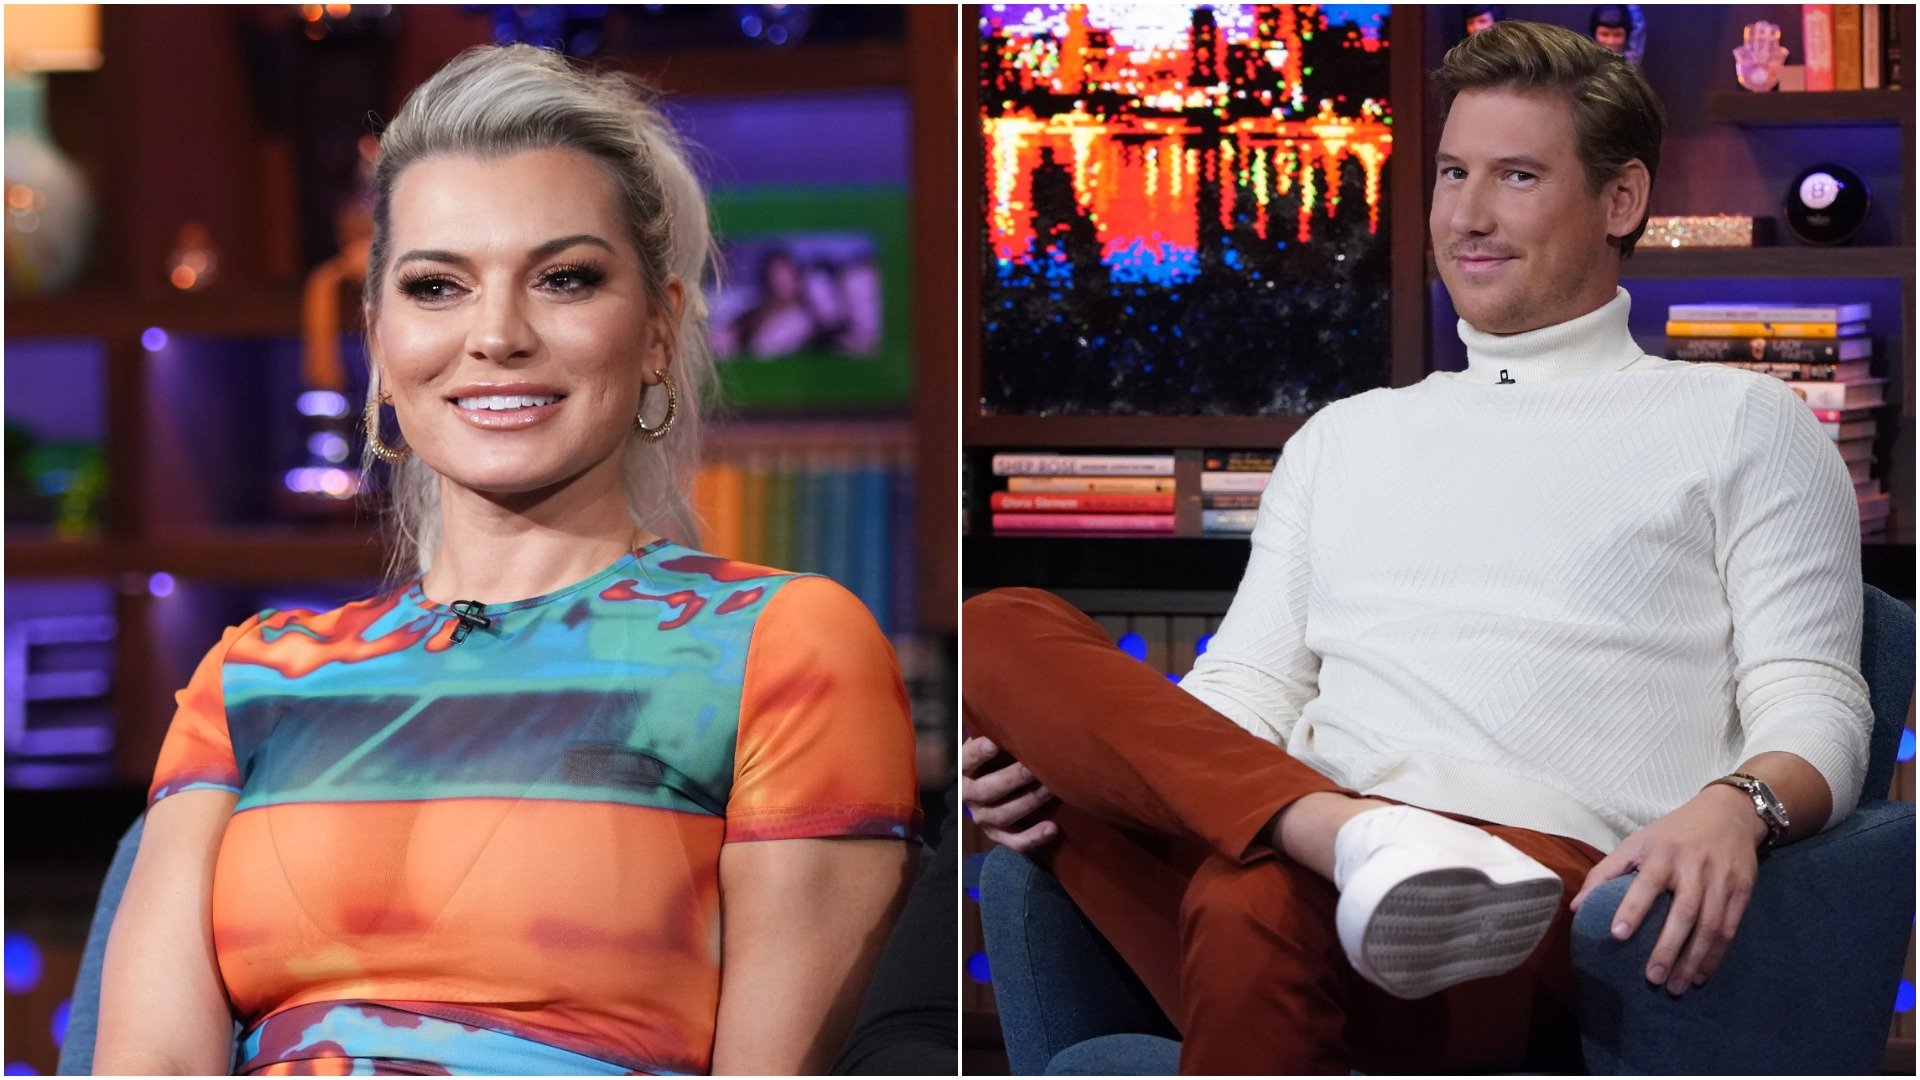 Lindsay Hubbard from Summer House appeared on WWHL and Austen Kroll from Southern Charm also appeared on WWHL 